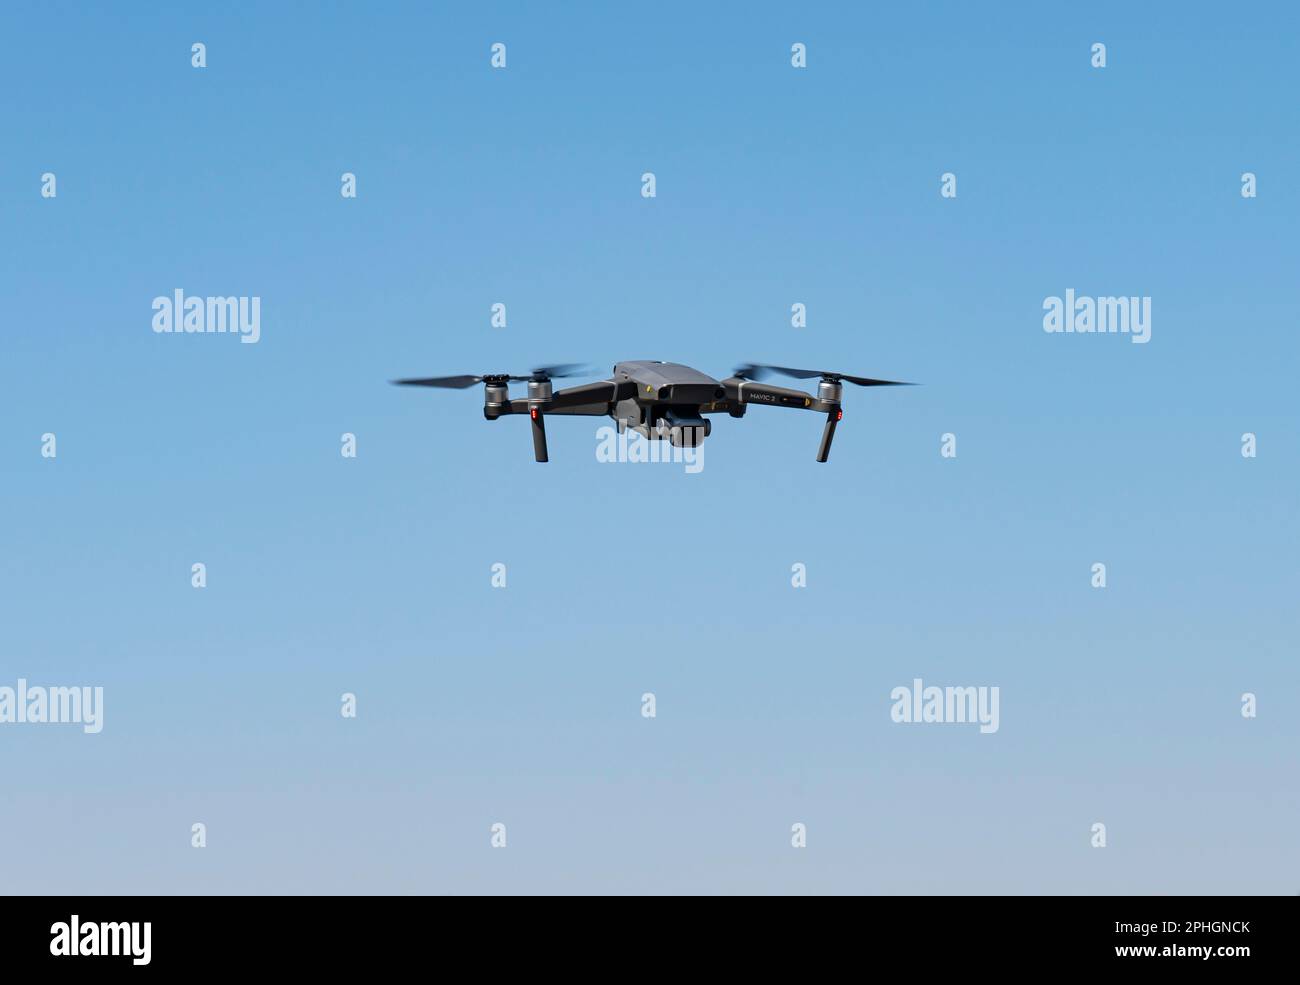 A flying mini drone recording video and photos in the blue sky Stock Photo